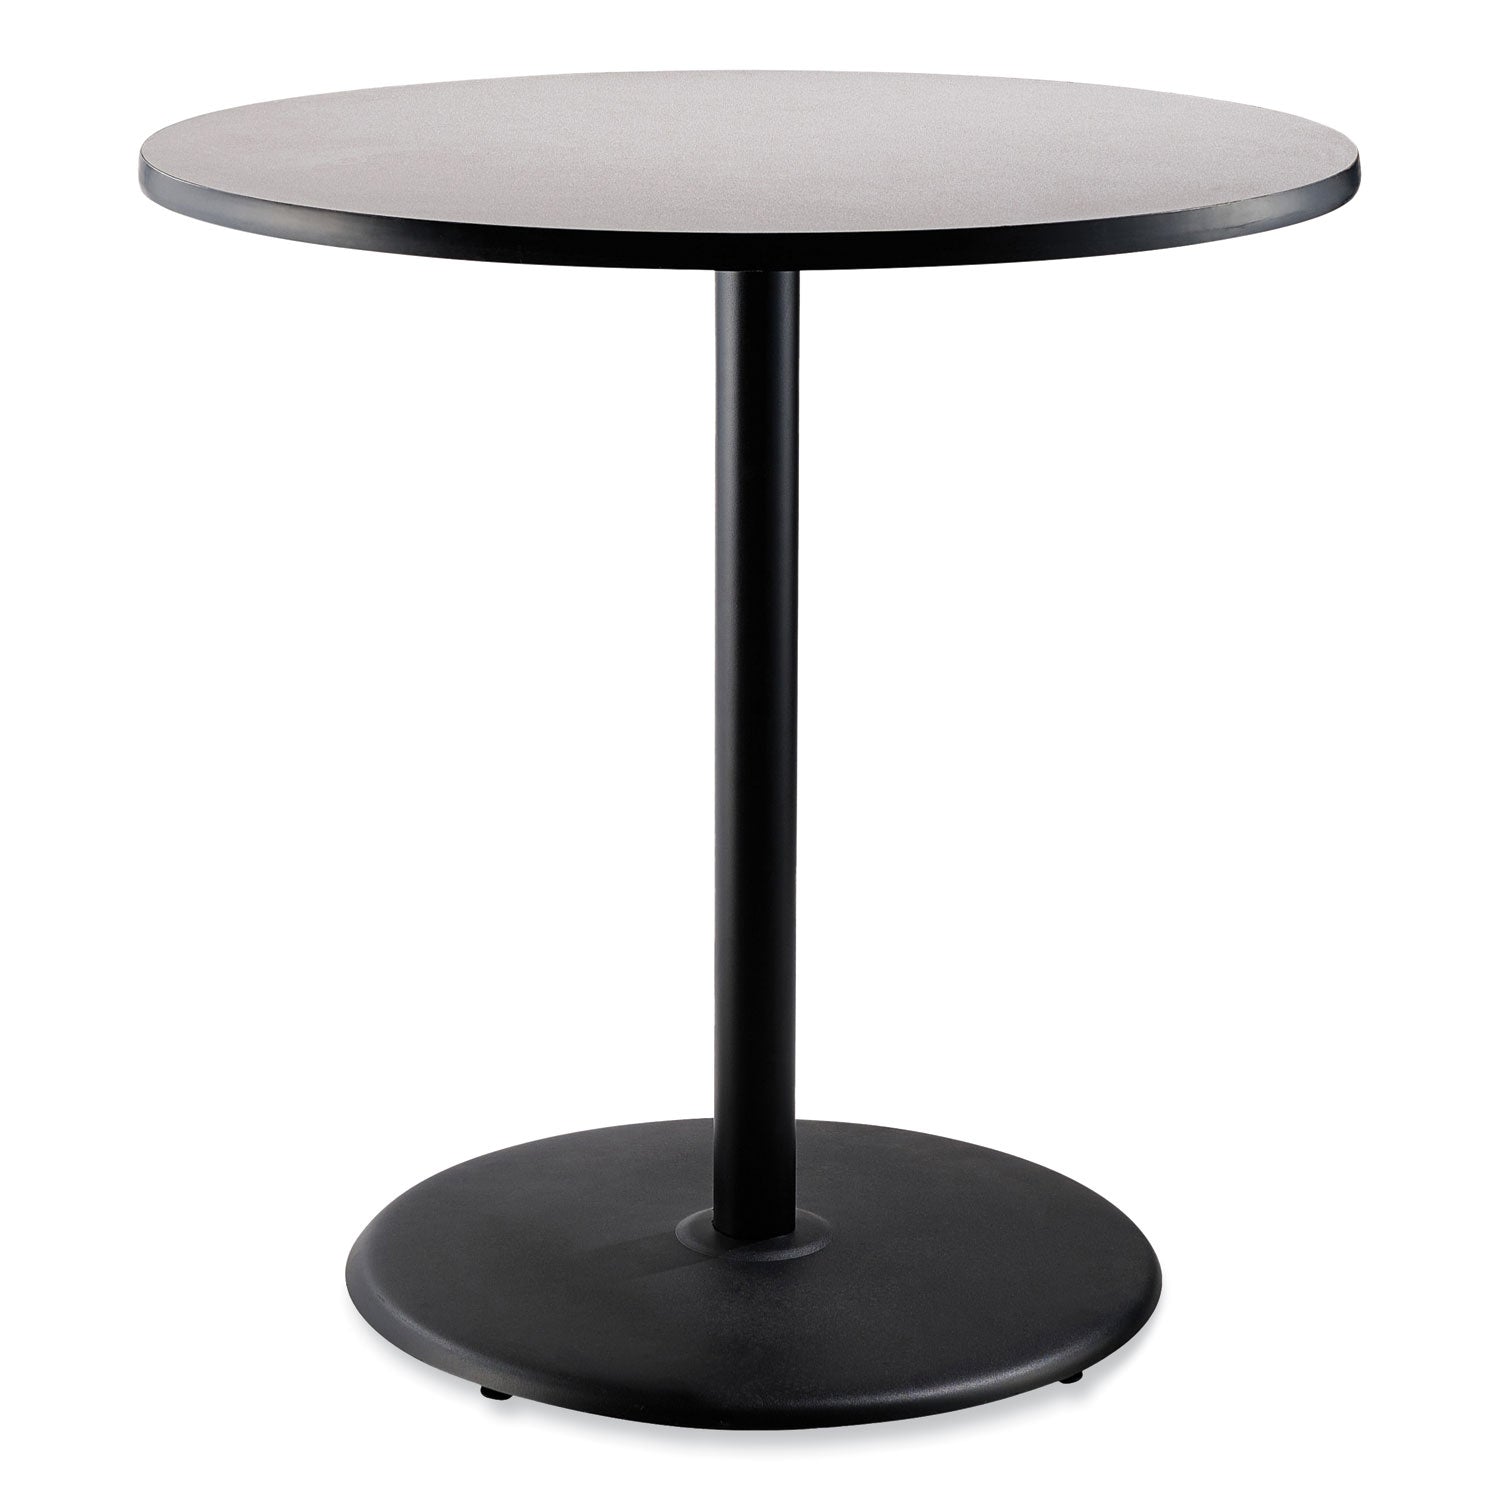 cafe-table-36-diameter-x-42h-round-top-base-gray-nebula-top-black-base-ships-in-7-10-business-days_npsct13636rb1gy - 1